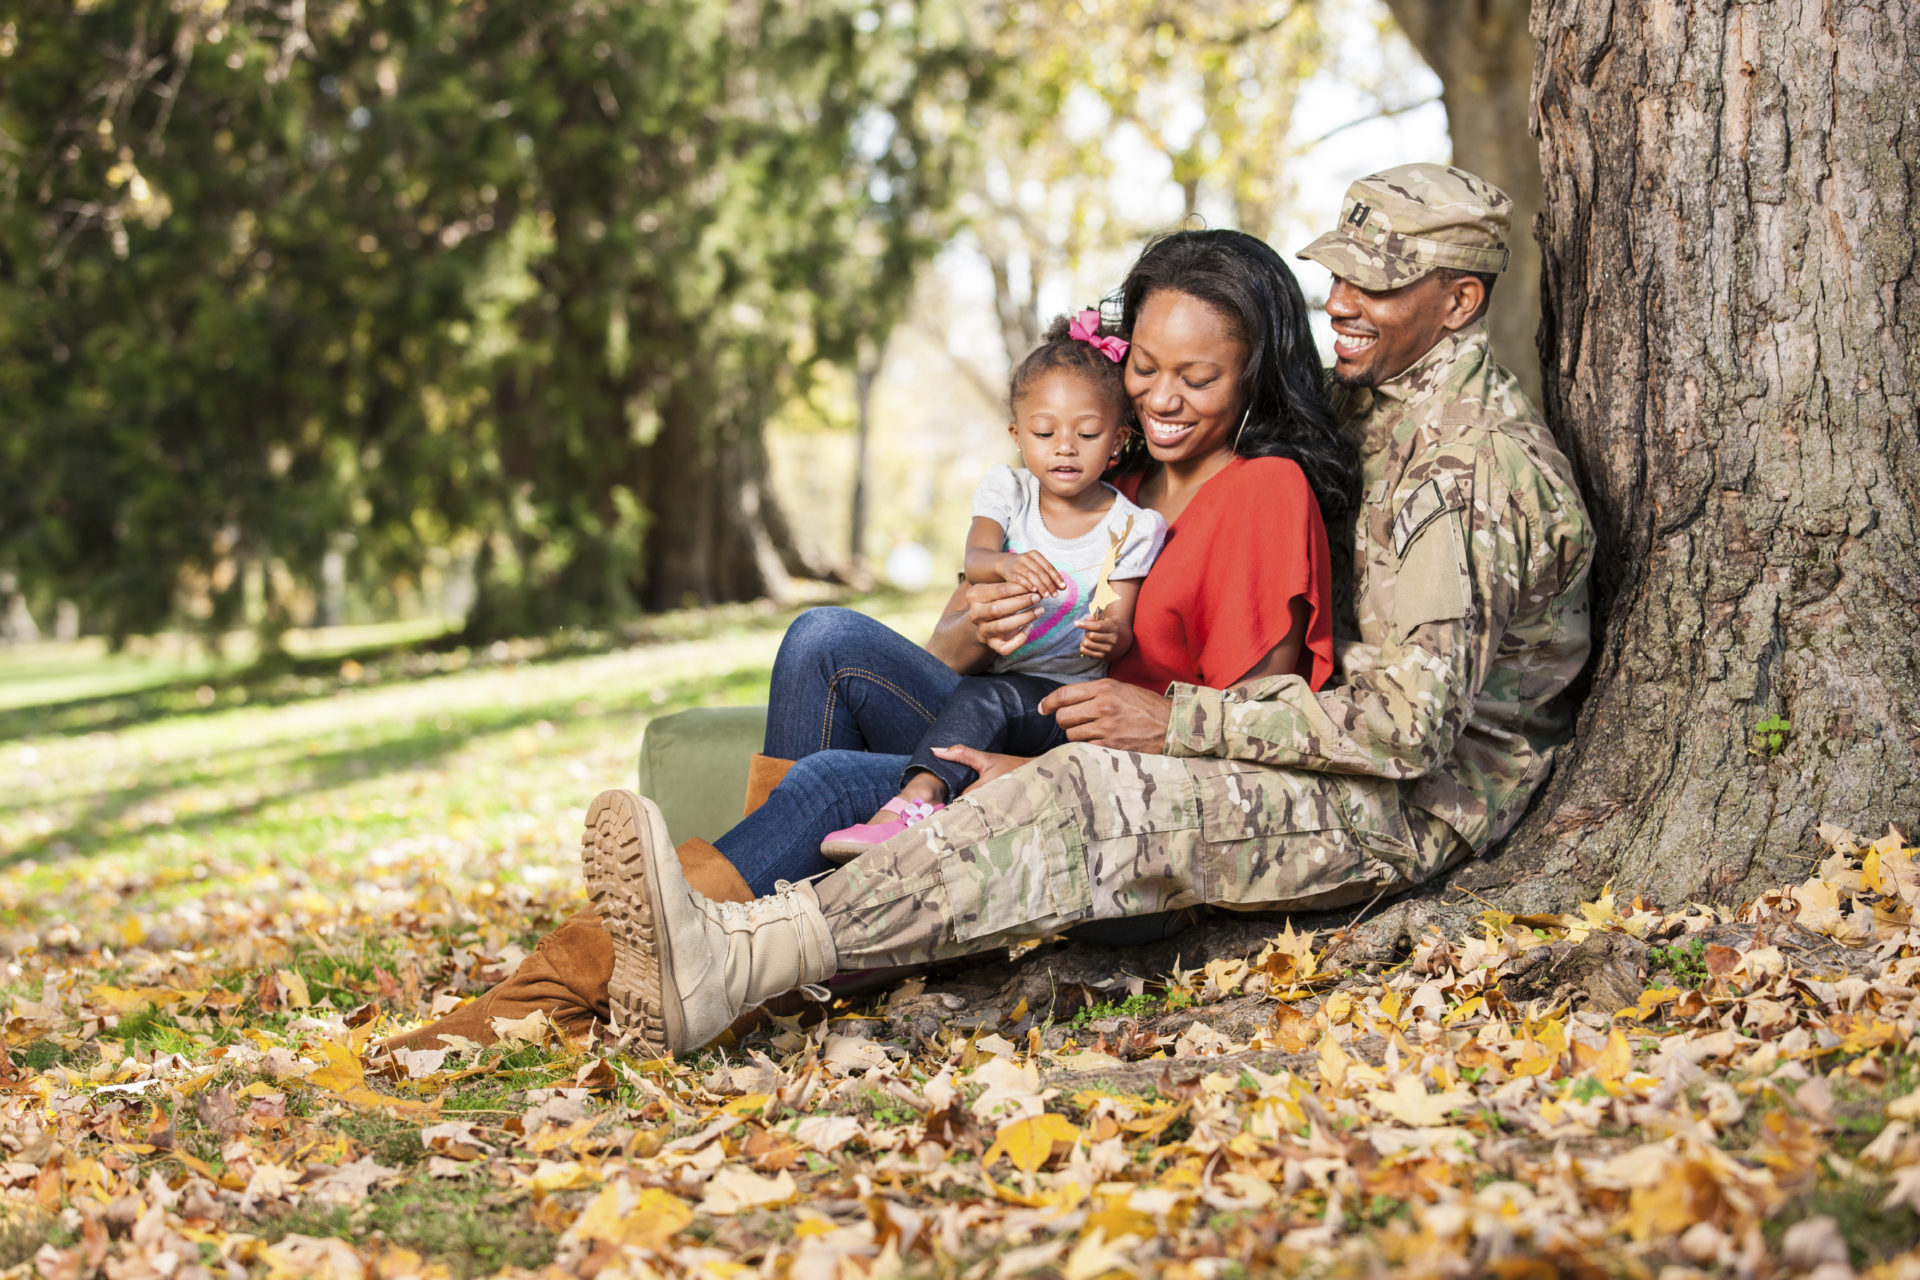 The Fertility Center of Las Vegas proudly provides fertility care for the military